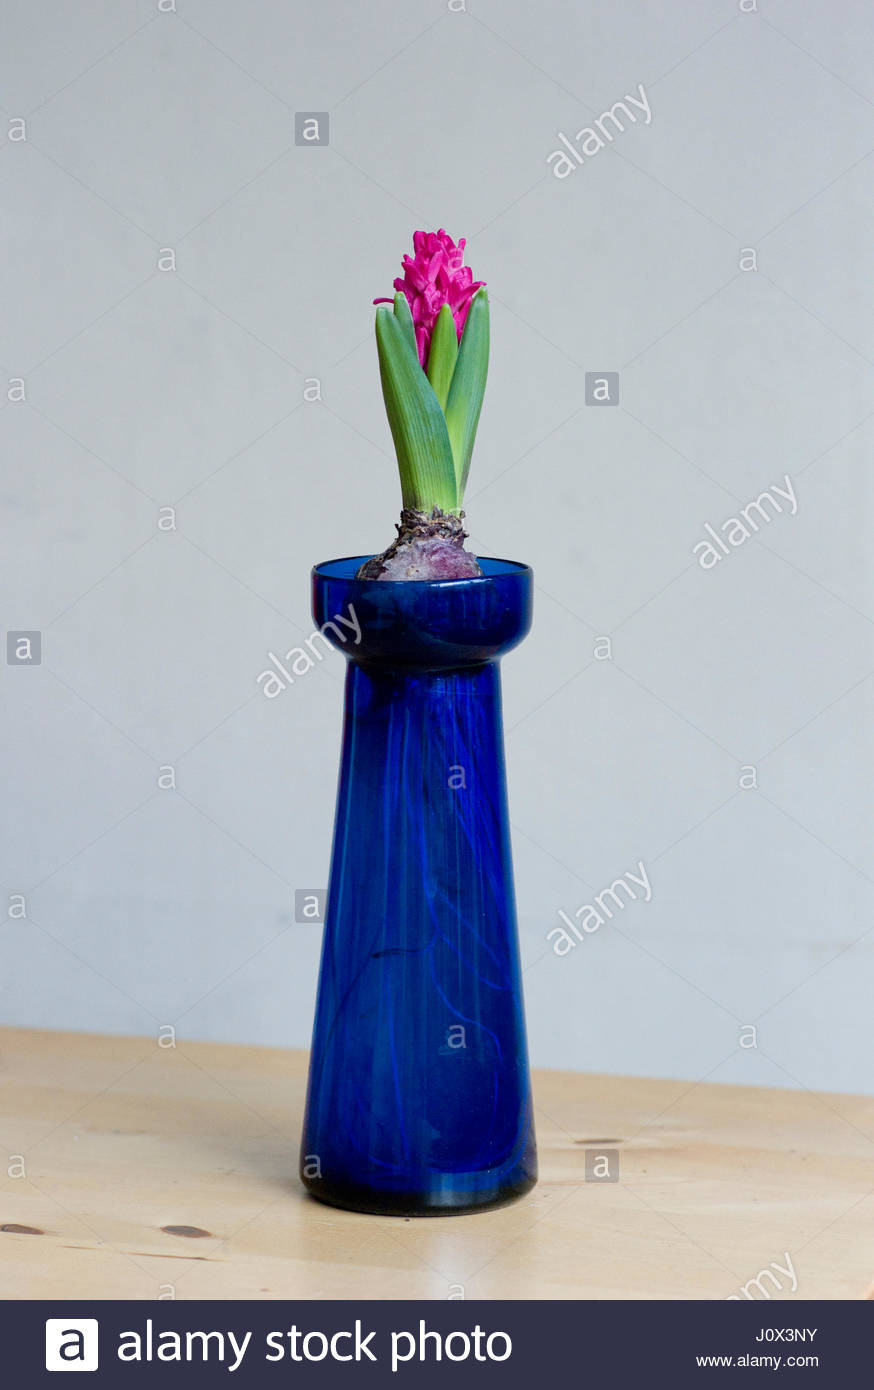 lightbulb bud vase of hyacinth bulb stock photos hyacinth bulb stock images alamy pertaining to antique victorian glass hyacinth bulb vases with bulbs which are forced into blooming in time for